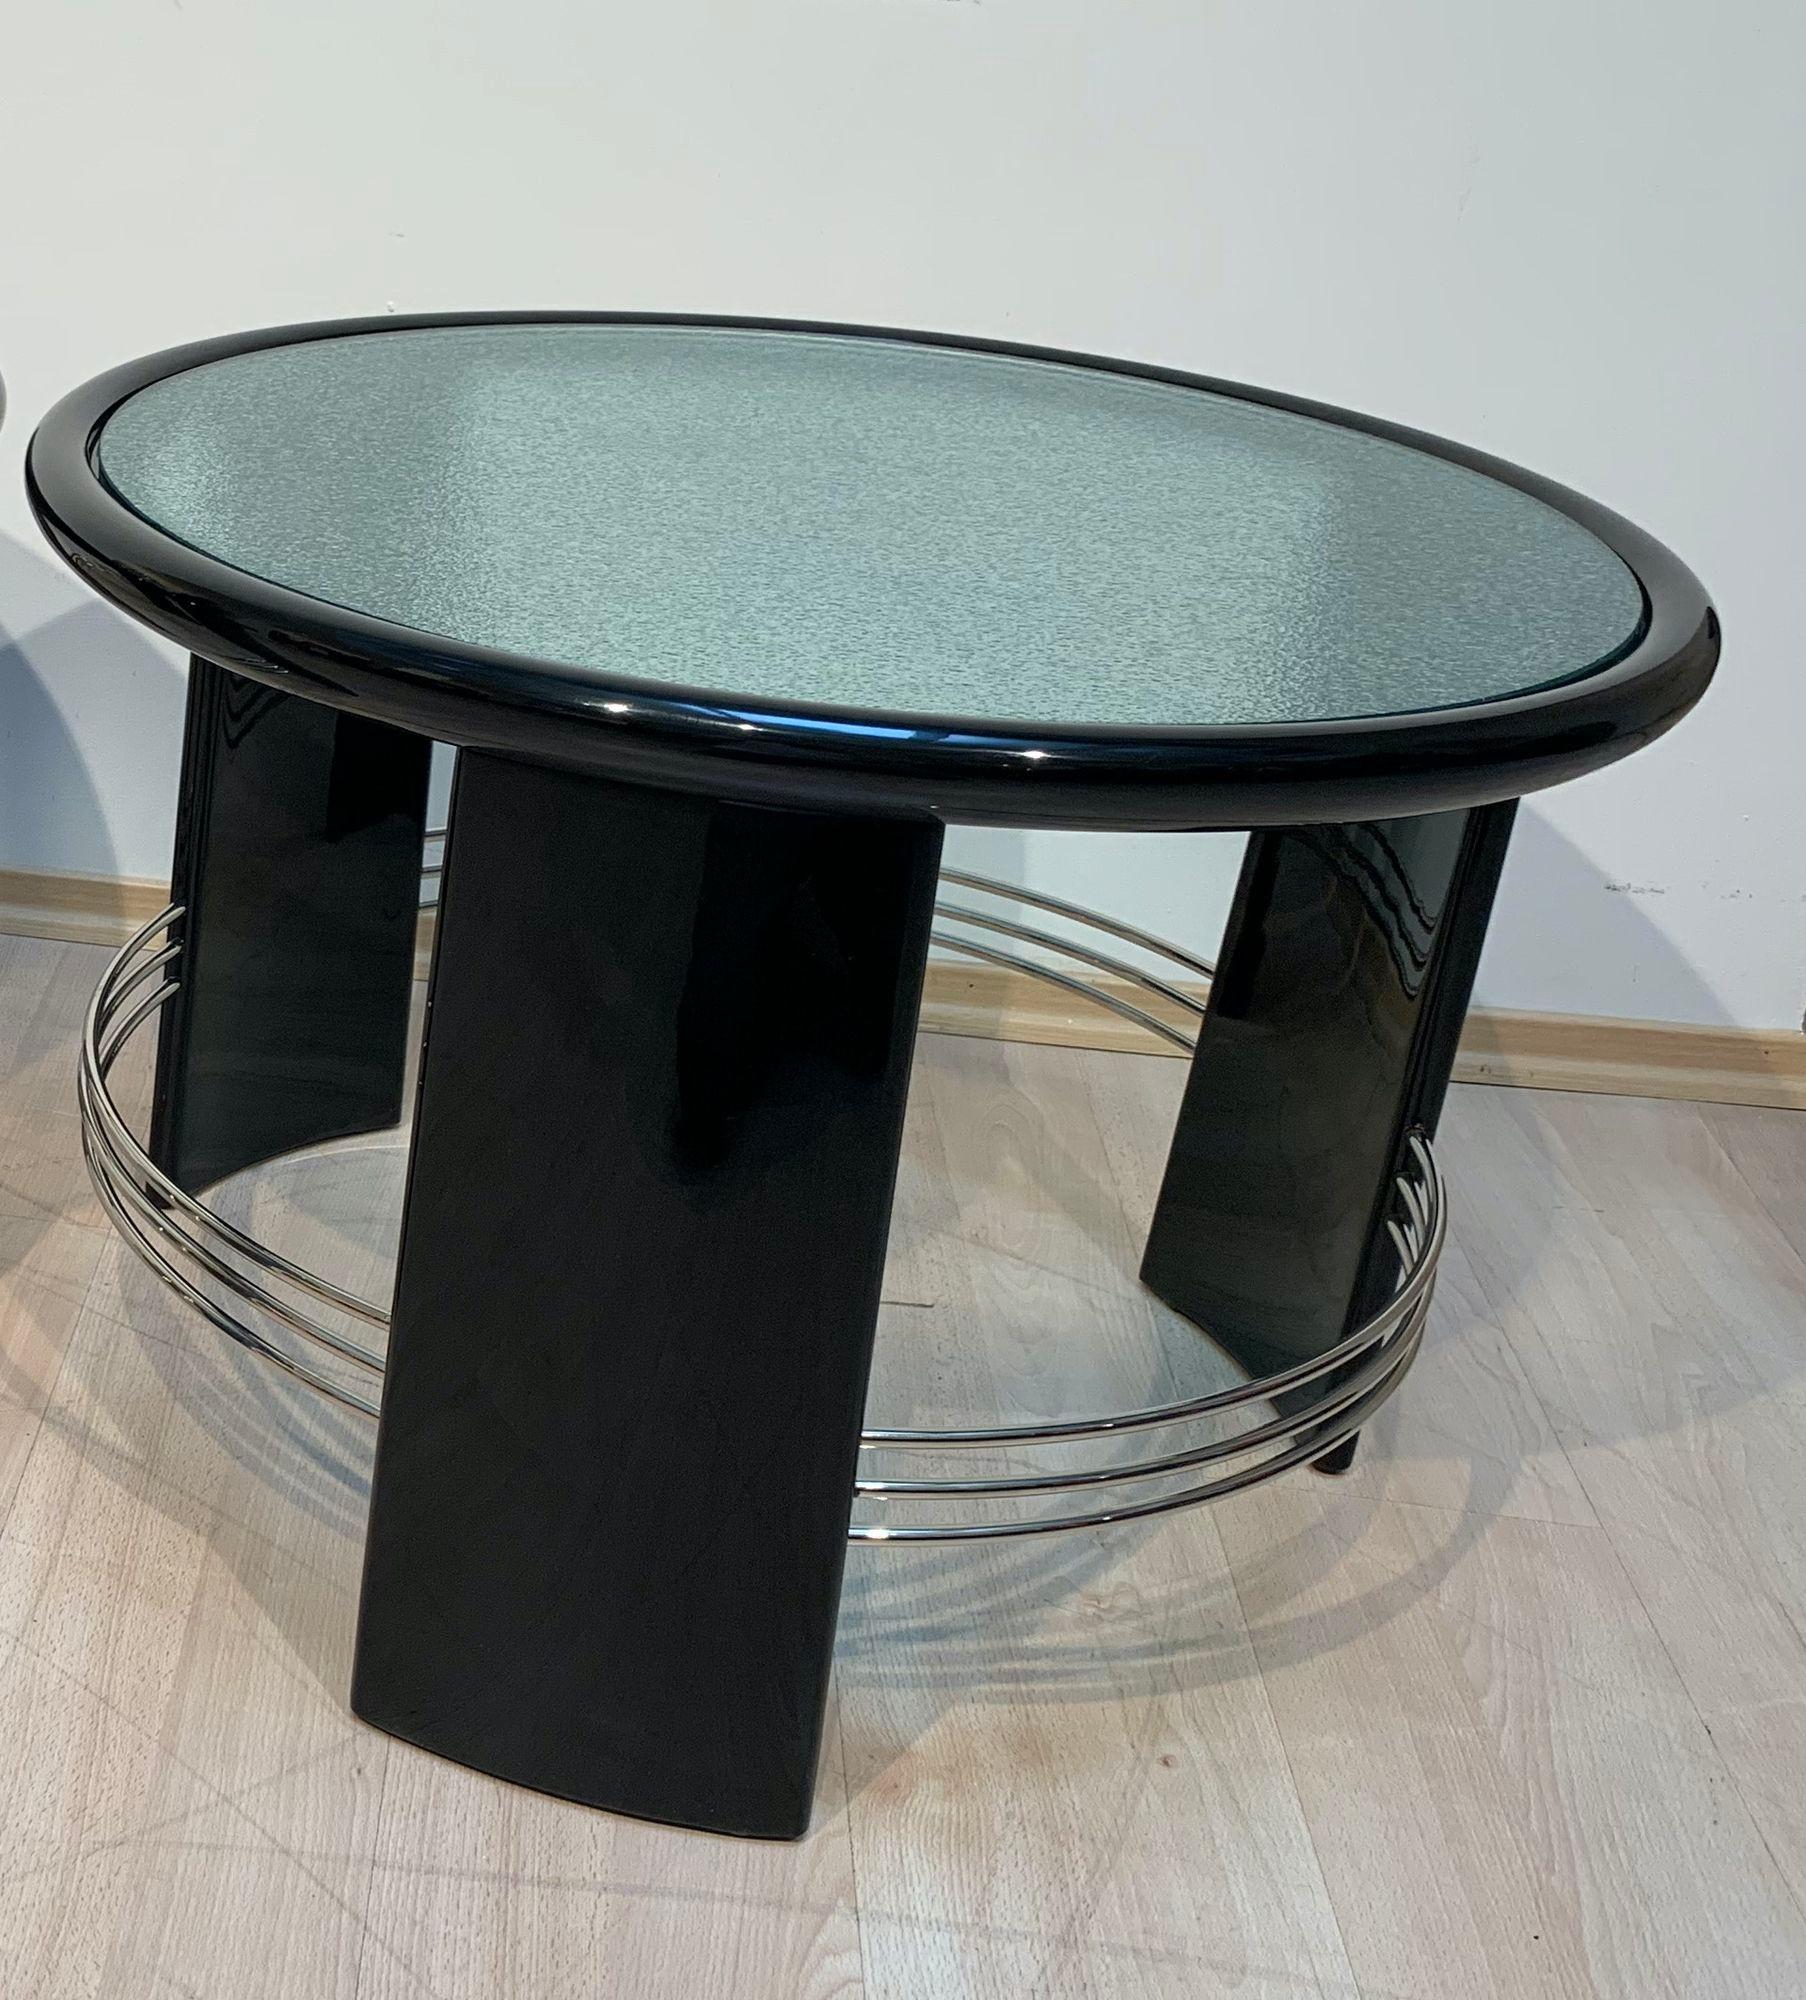 Art Deco Round Coffee Table, Black Lacquer, Chrome, Glass, France circa 1930 For Sale 3